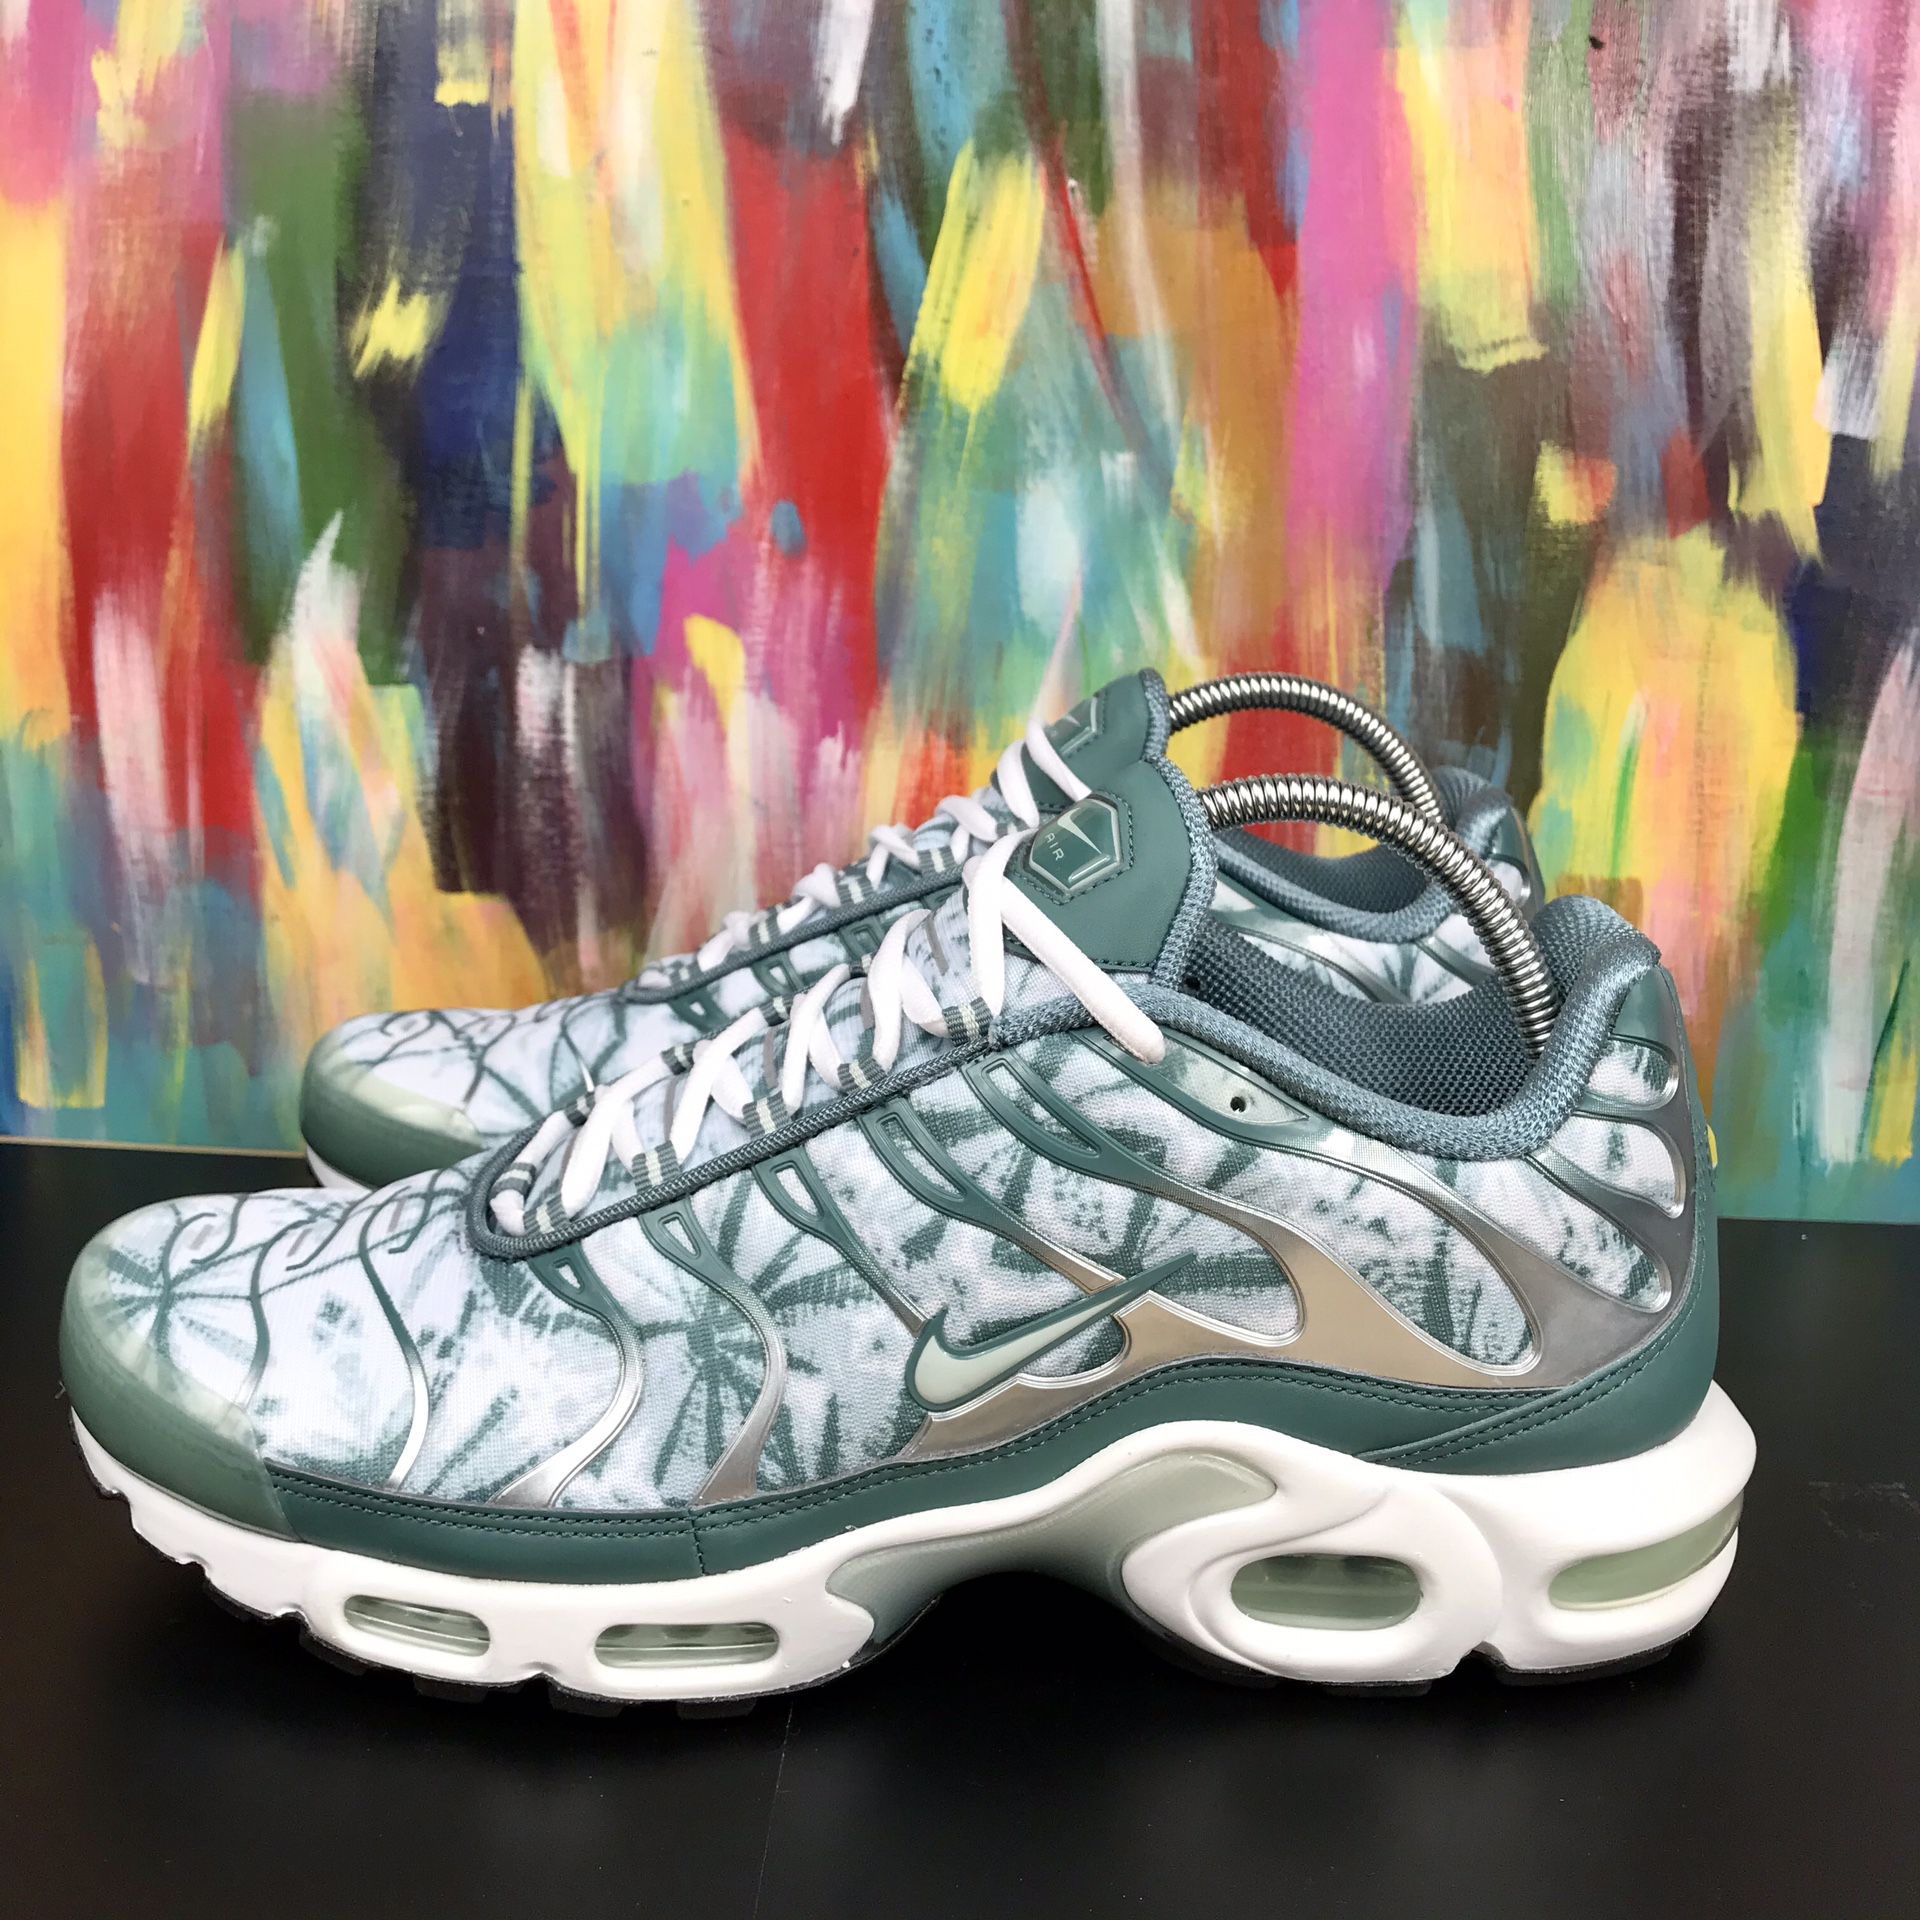 NEW Air Max Plus Palm Trees Green Mens Size 11.5 for Sale in Bakersfield, CA - OfferUp